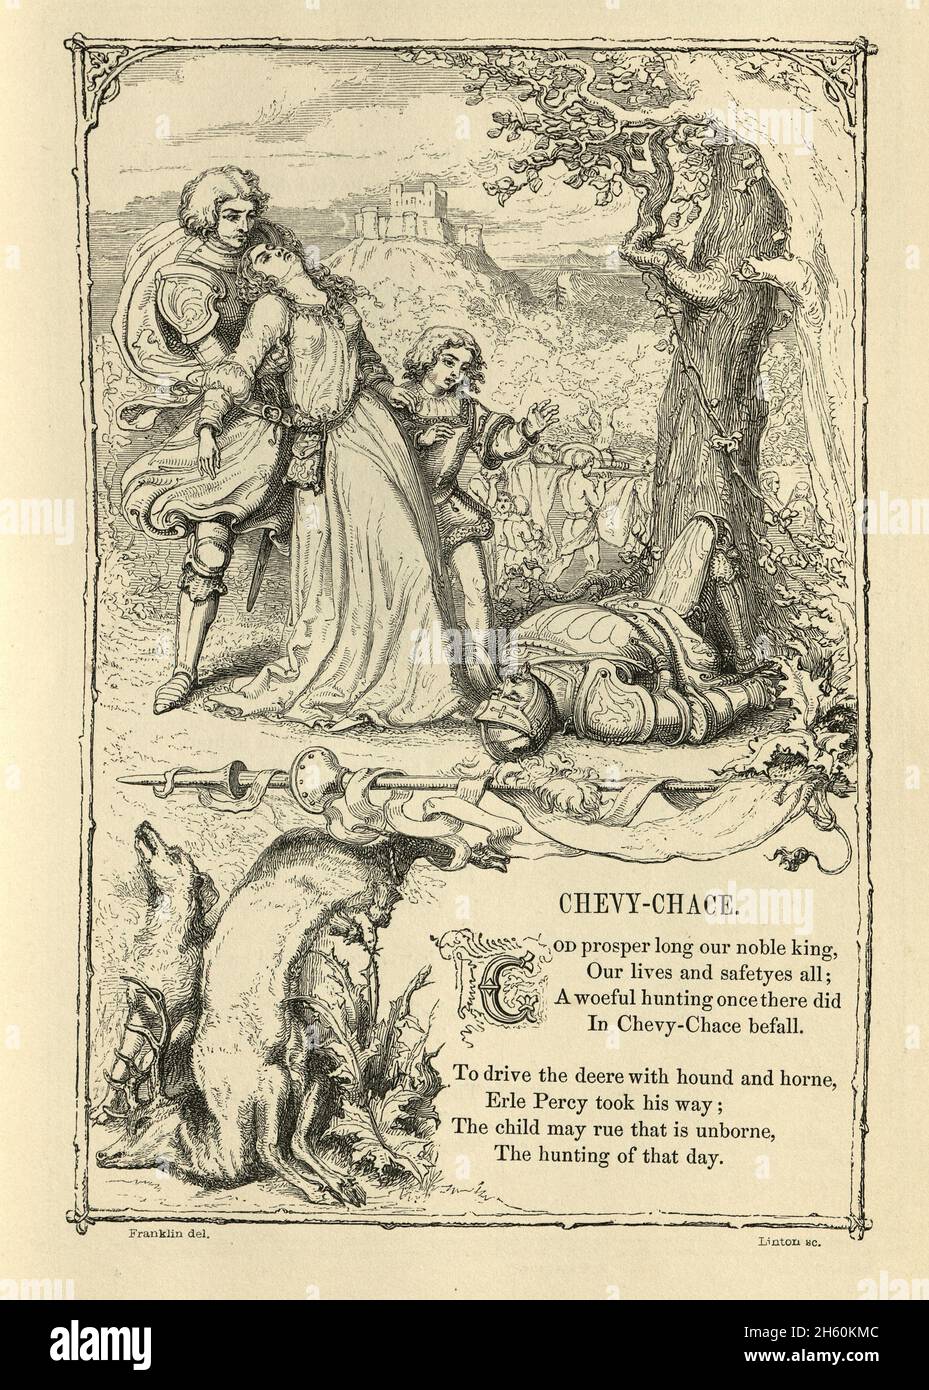 Scene from The Ballad of Chevy Chase, the ballads tell the story of a large hunting party upon a parcel of hunting land (or chase) in the Cheviot Hill Stock Photo